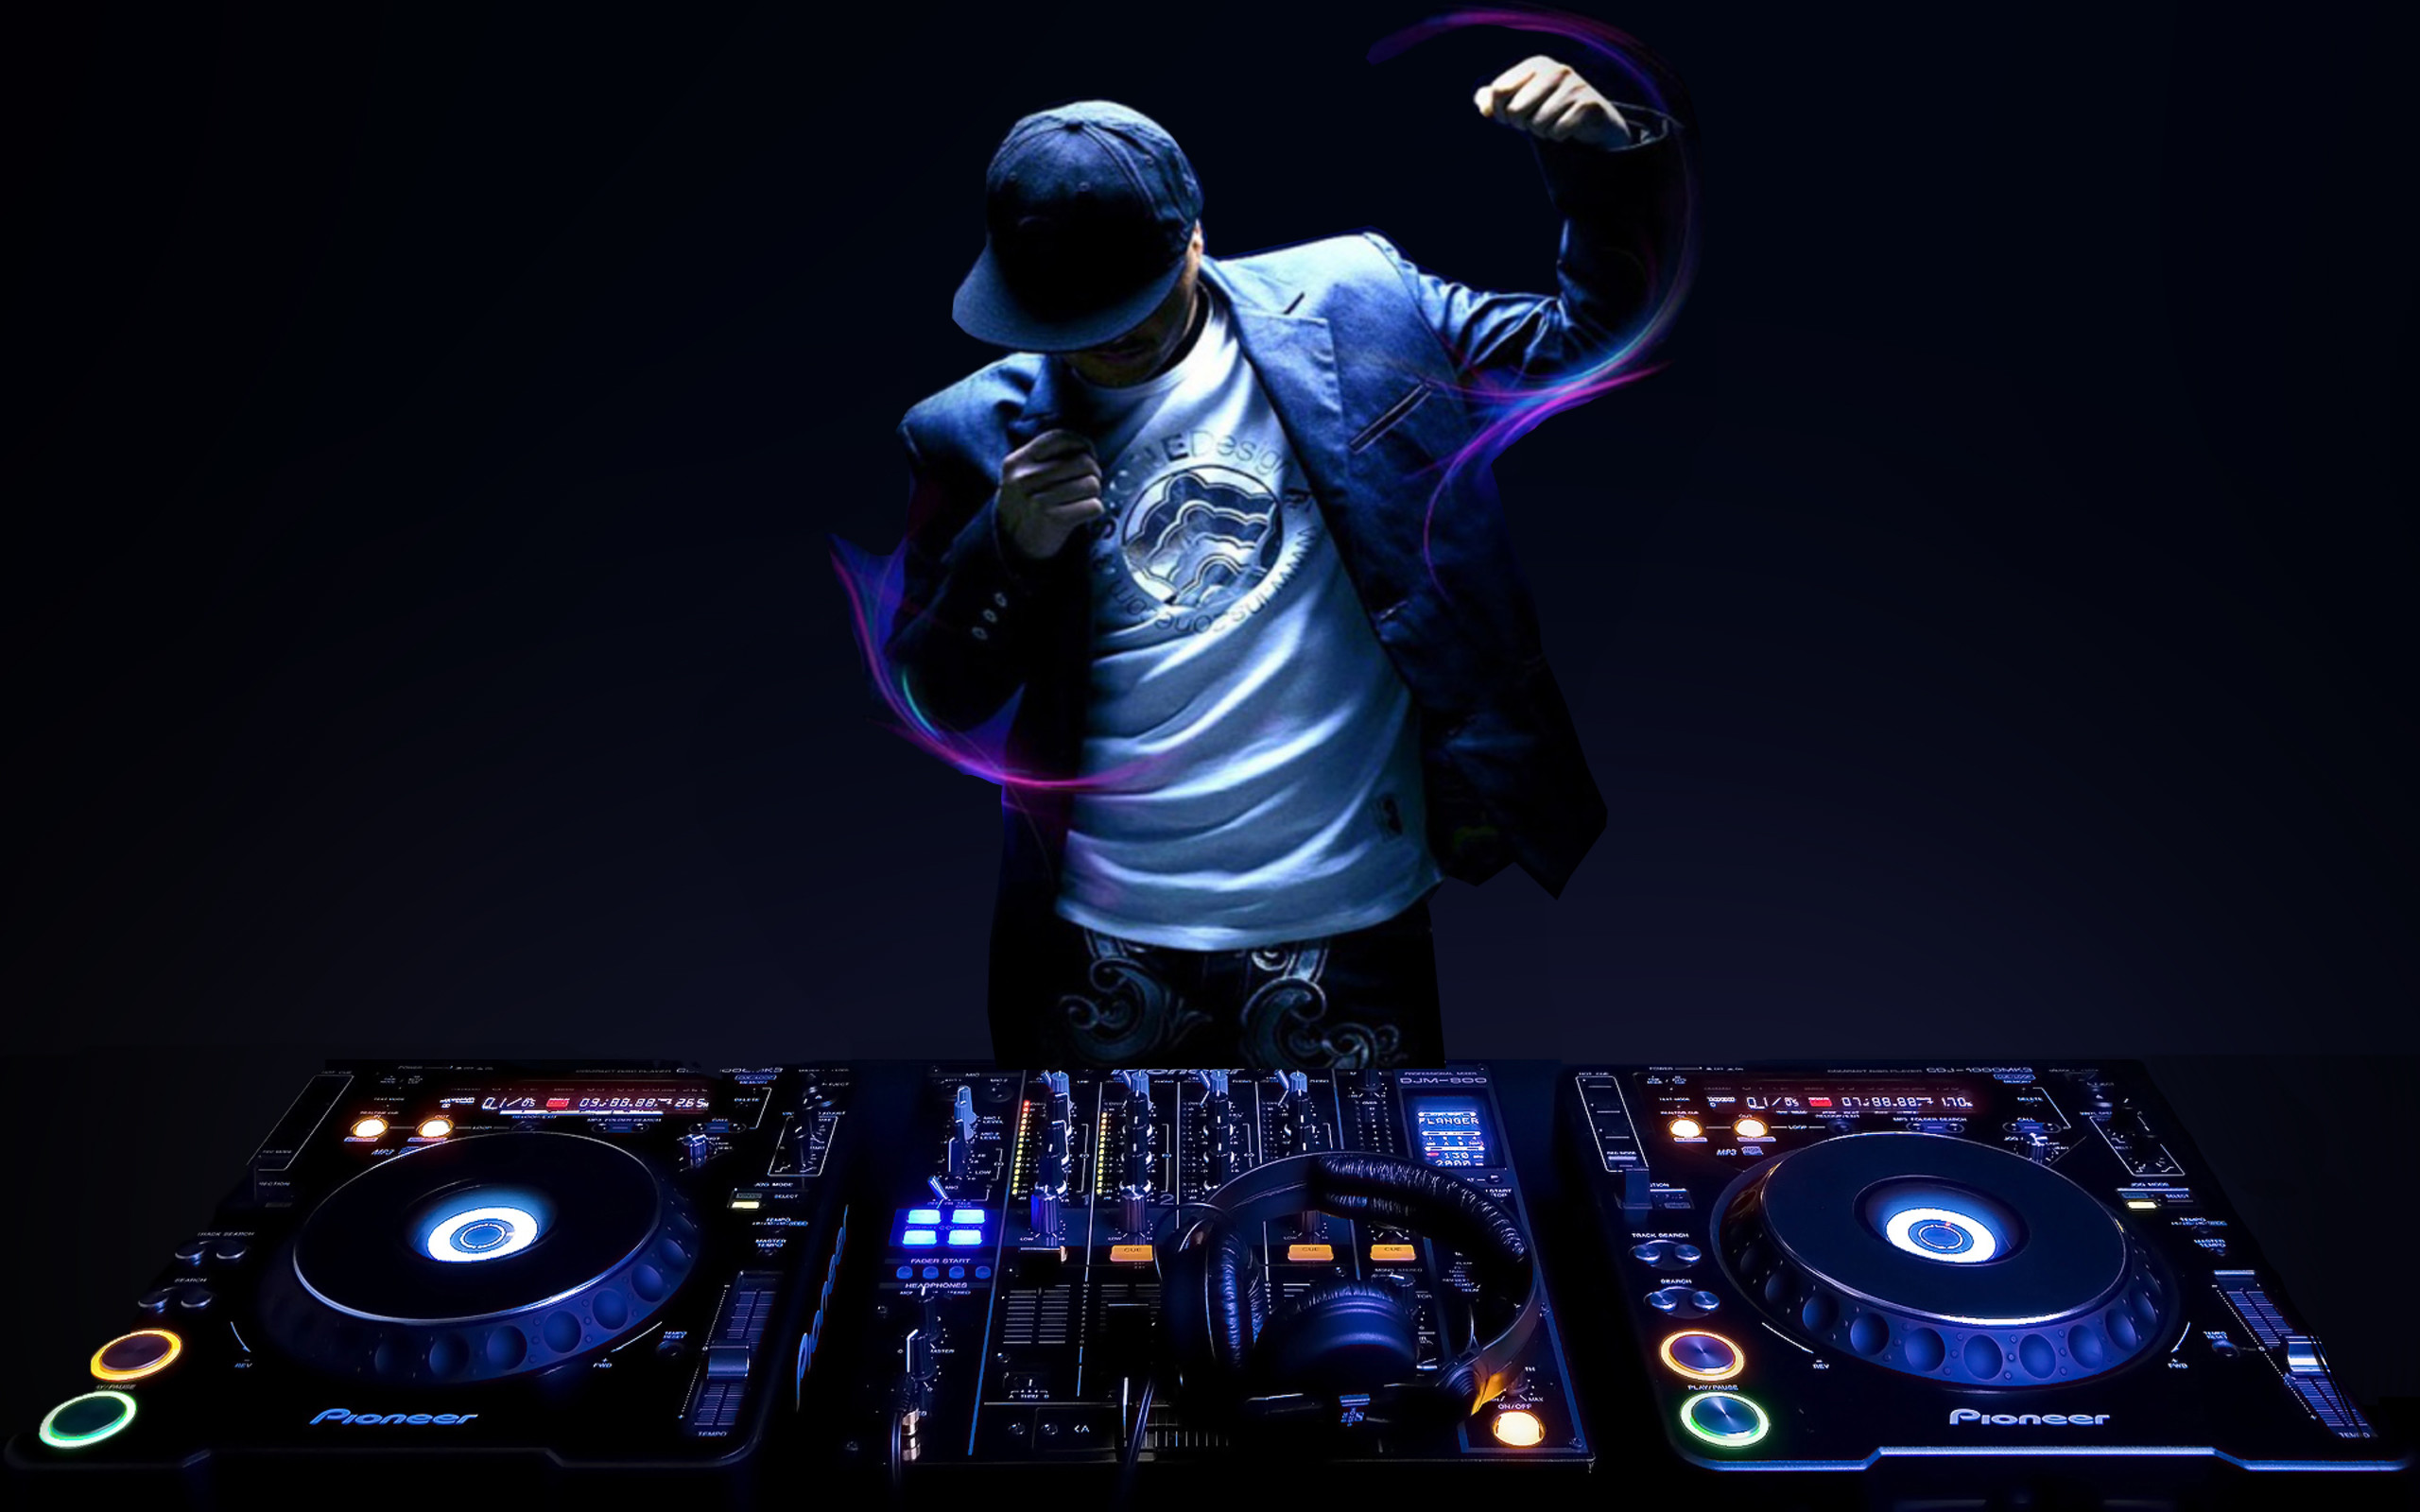 2560x1600 Do you want to get marriage this season and enjoy party with DJ. You need  to DJ on rent for for some hourse. is free rental website where you can  find Dj ...